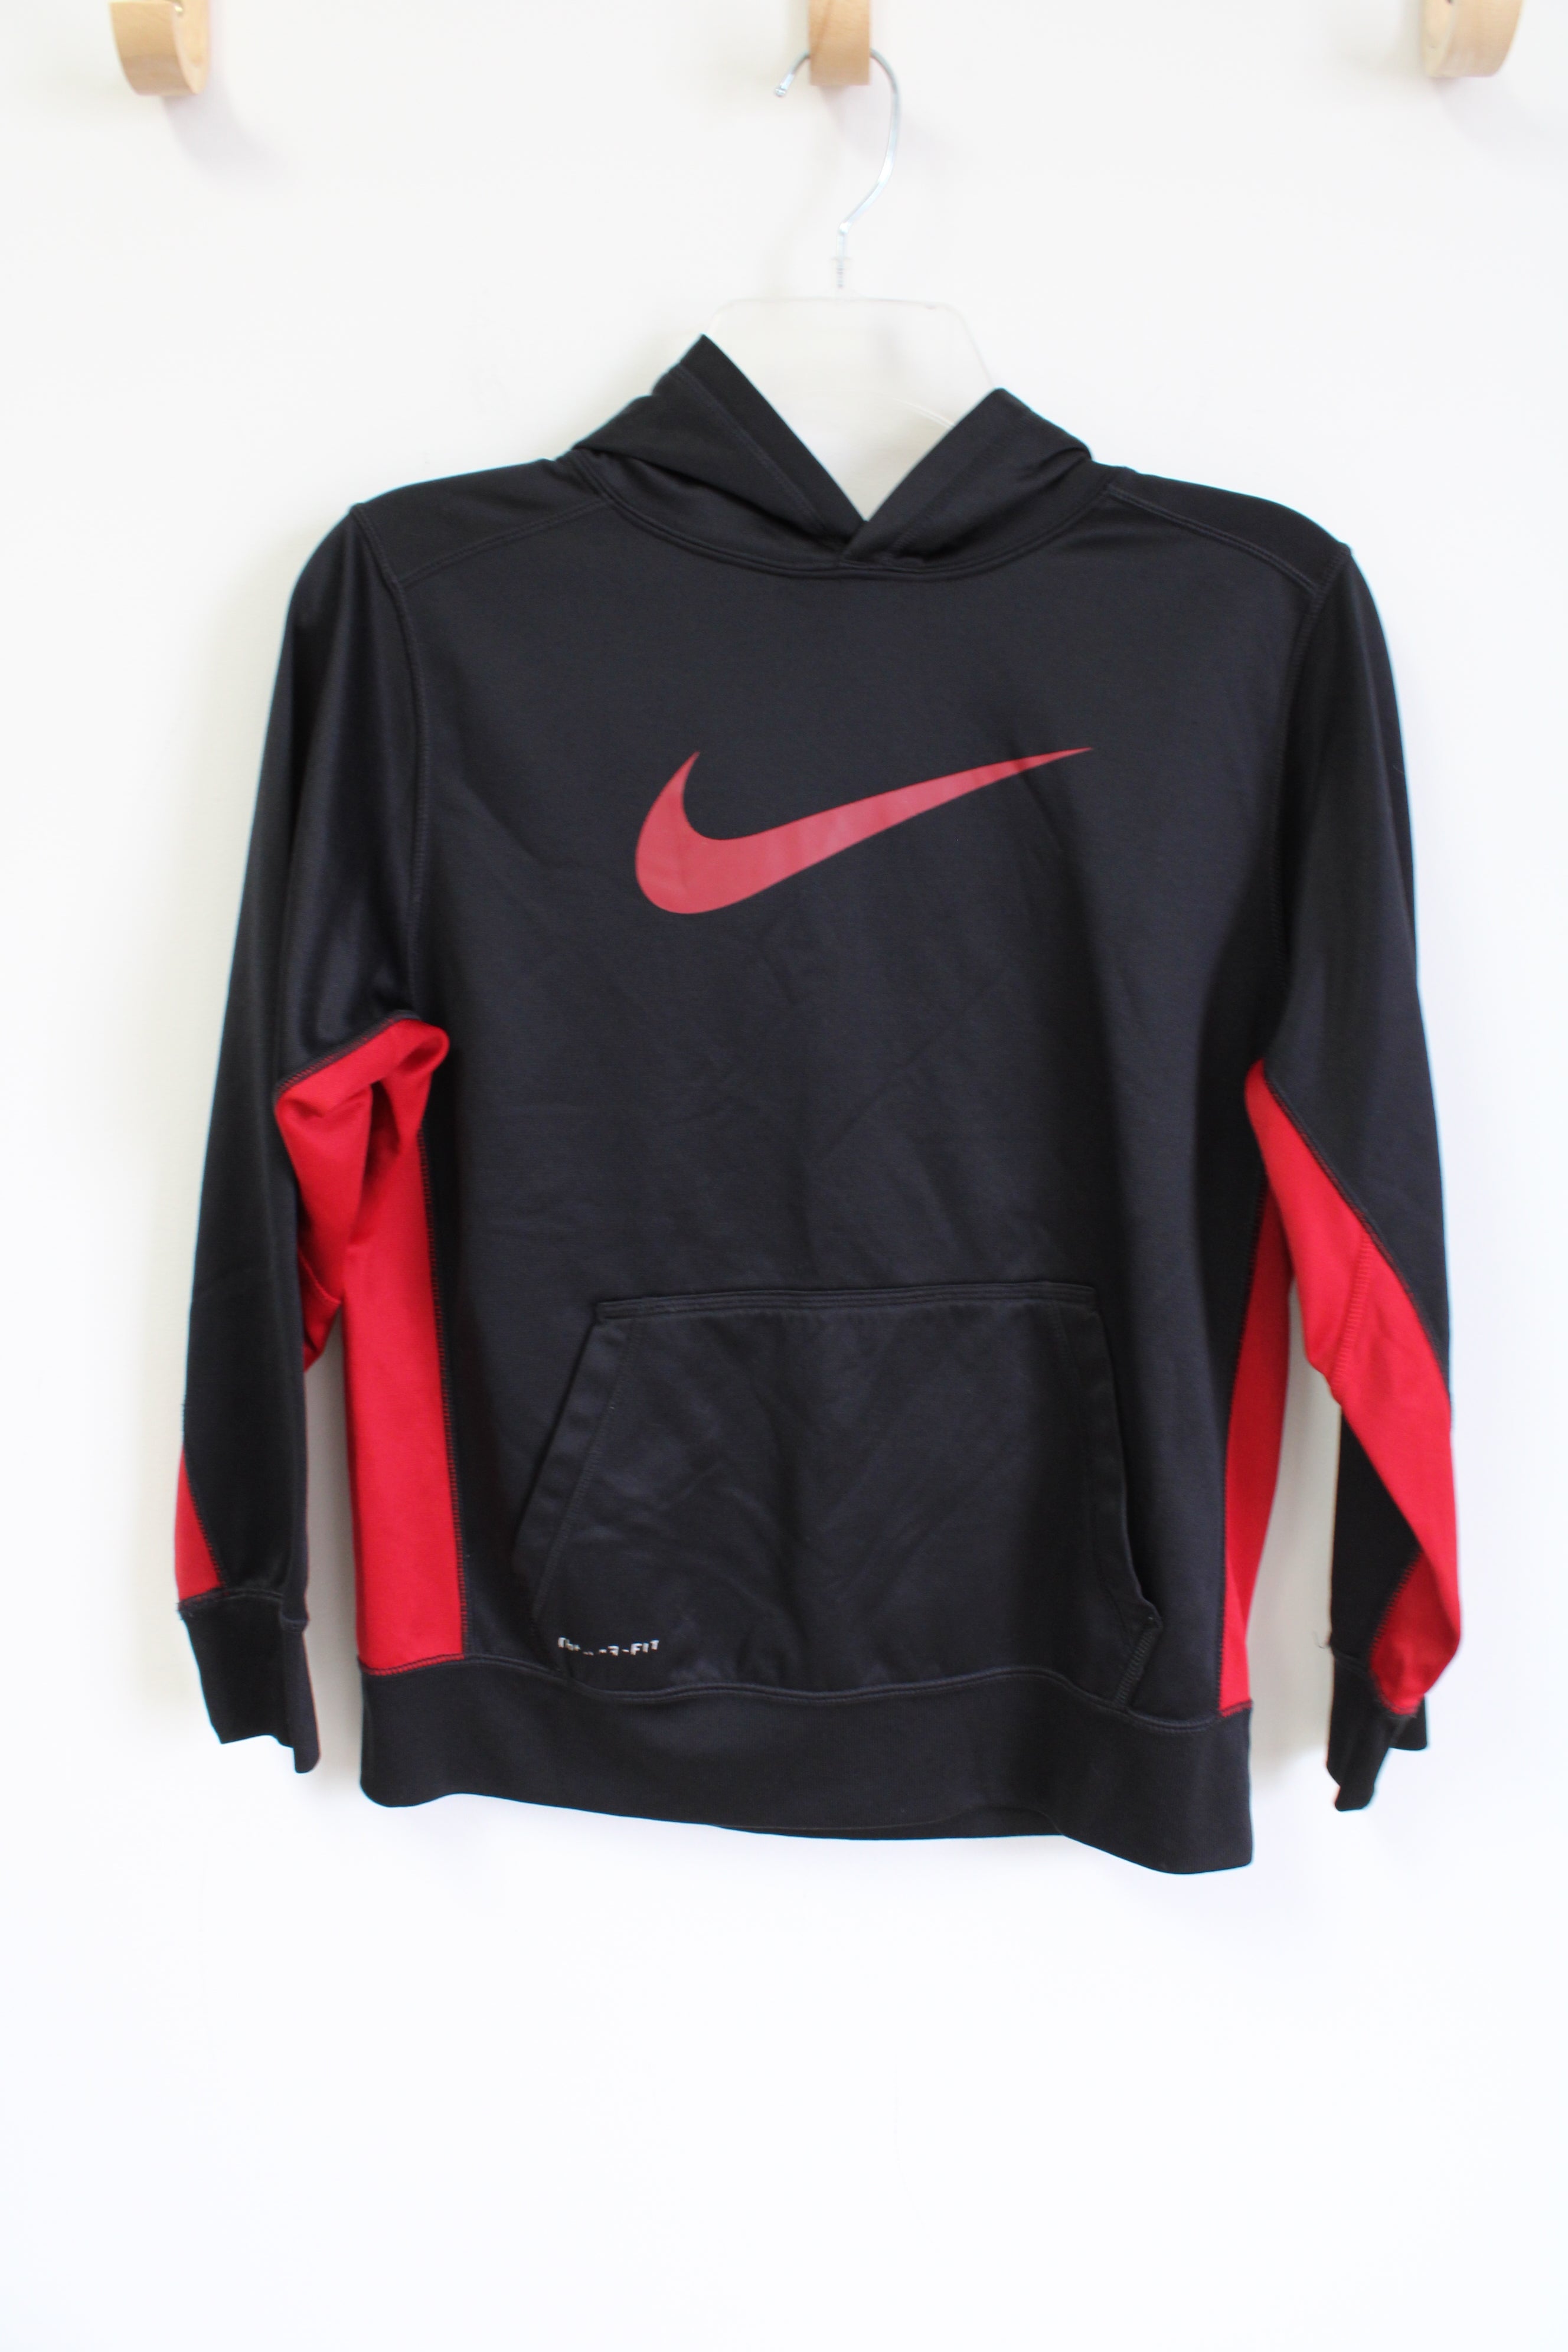 Nike Therma-Fit Black Red Fleece Lined Hoodie Youth L (14/16)